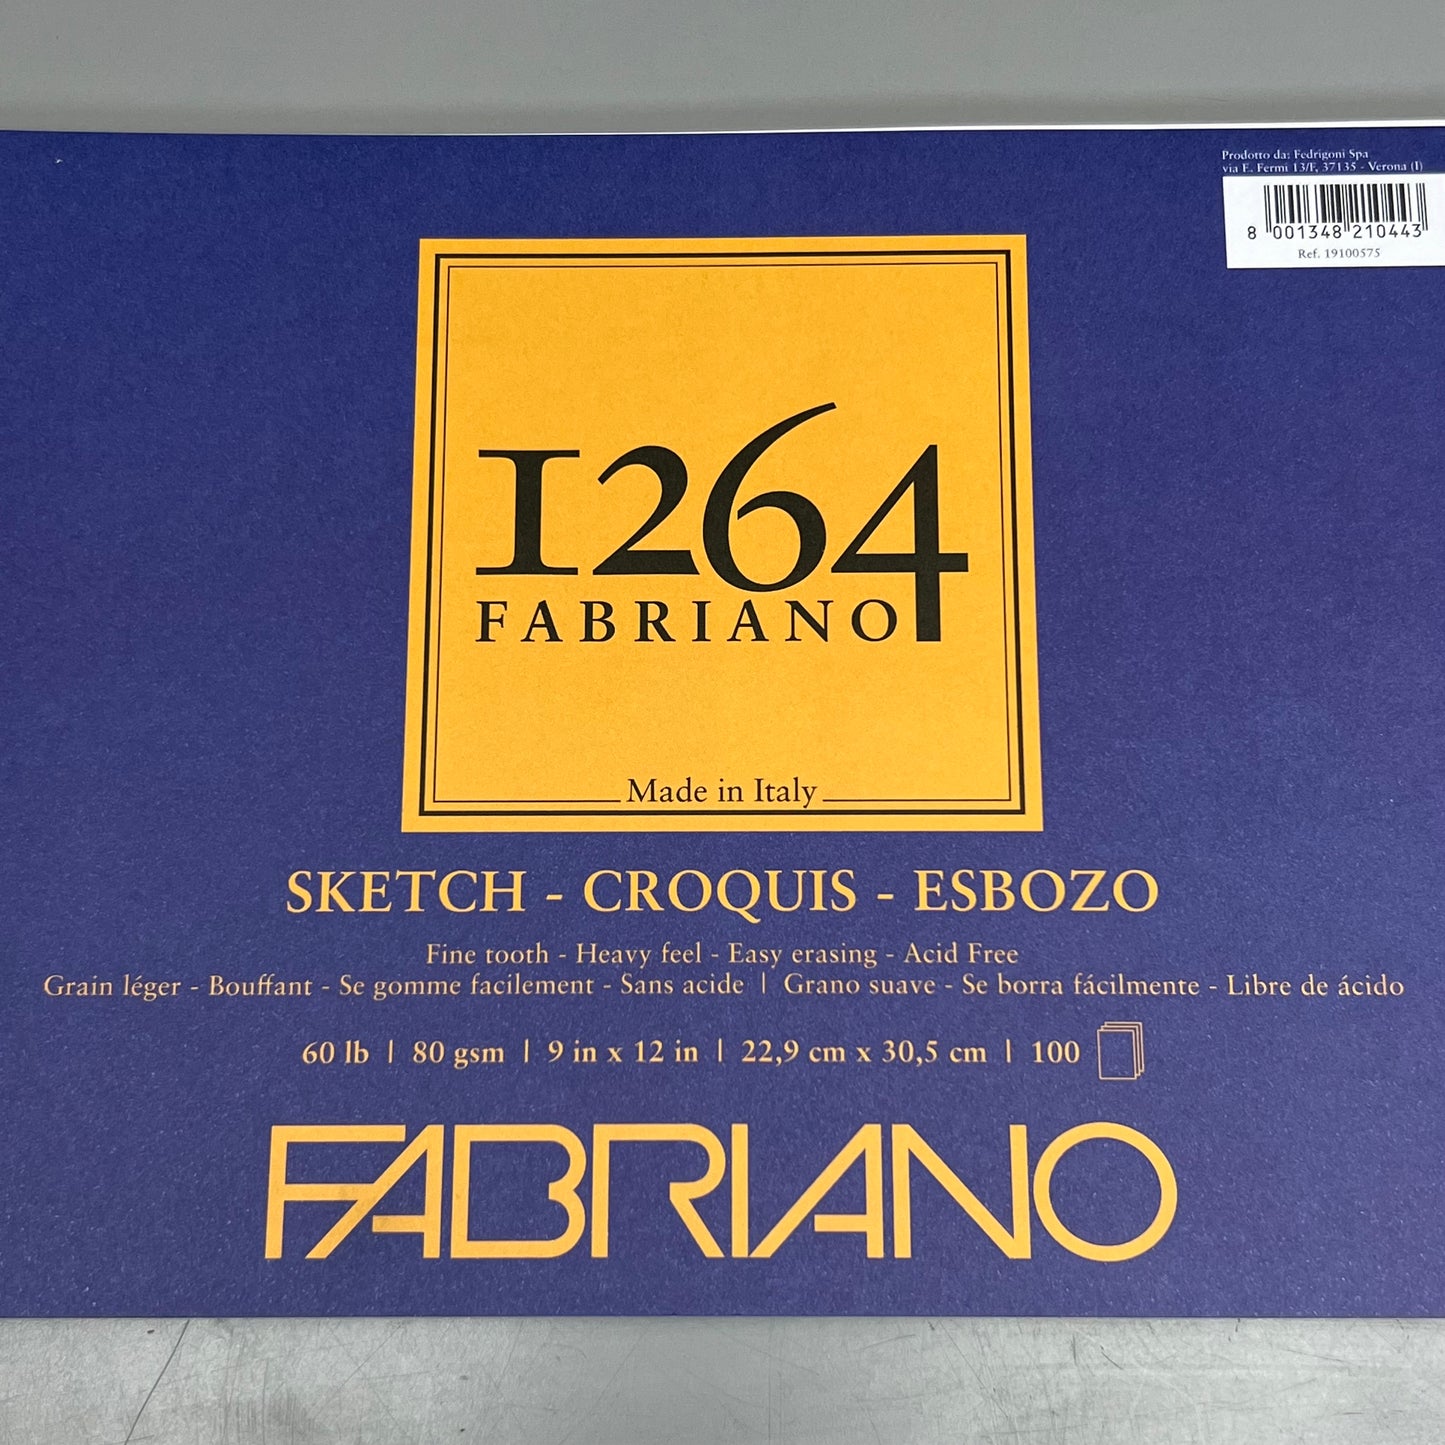 FABRIANO (5 PACK) I264 Sketch Paper Pads 9" x 12" ITALY 100 Sheets (500 TOTAL) White